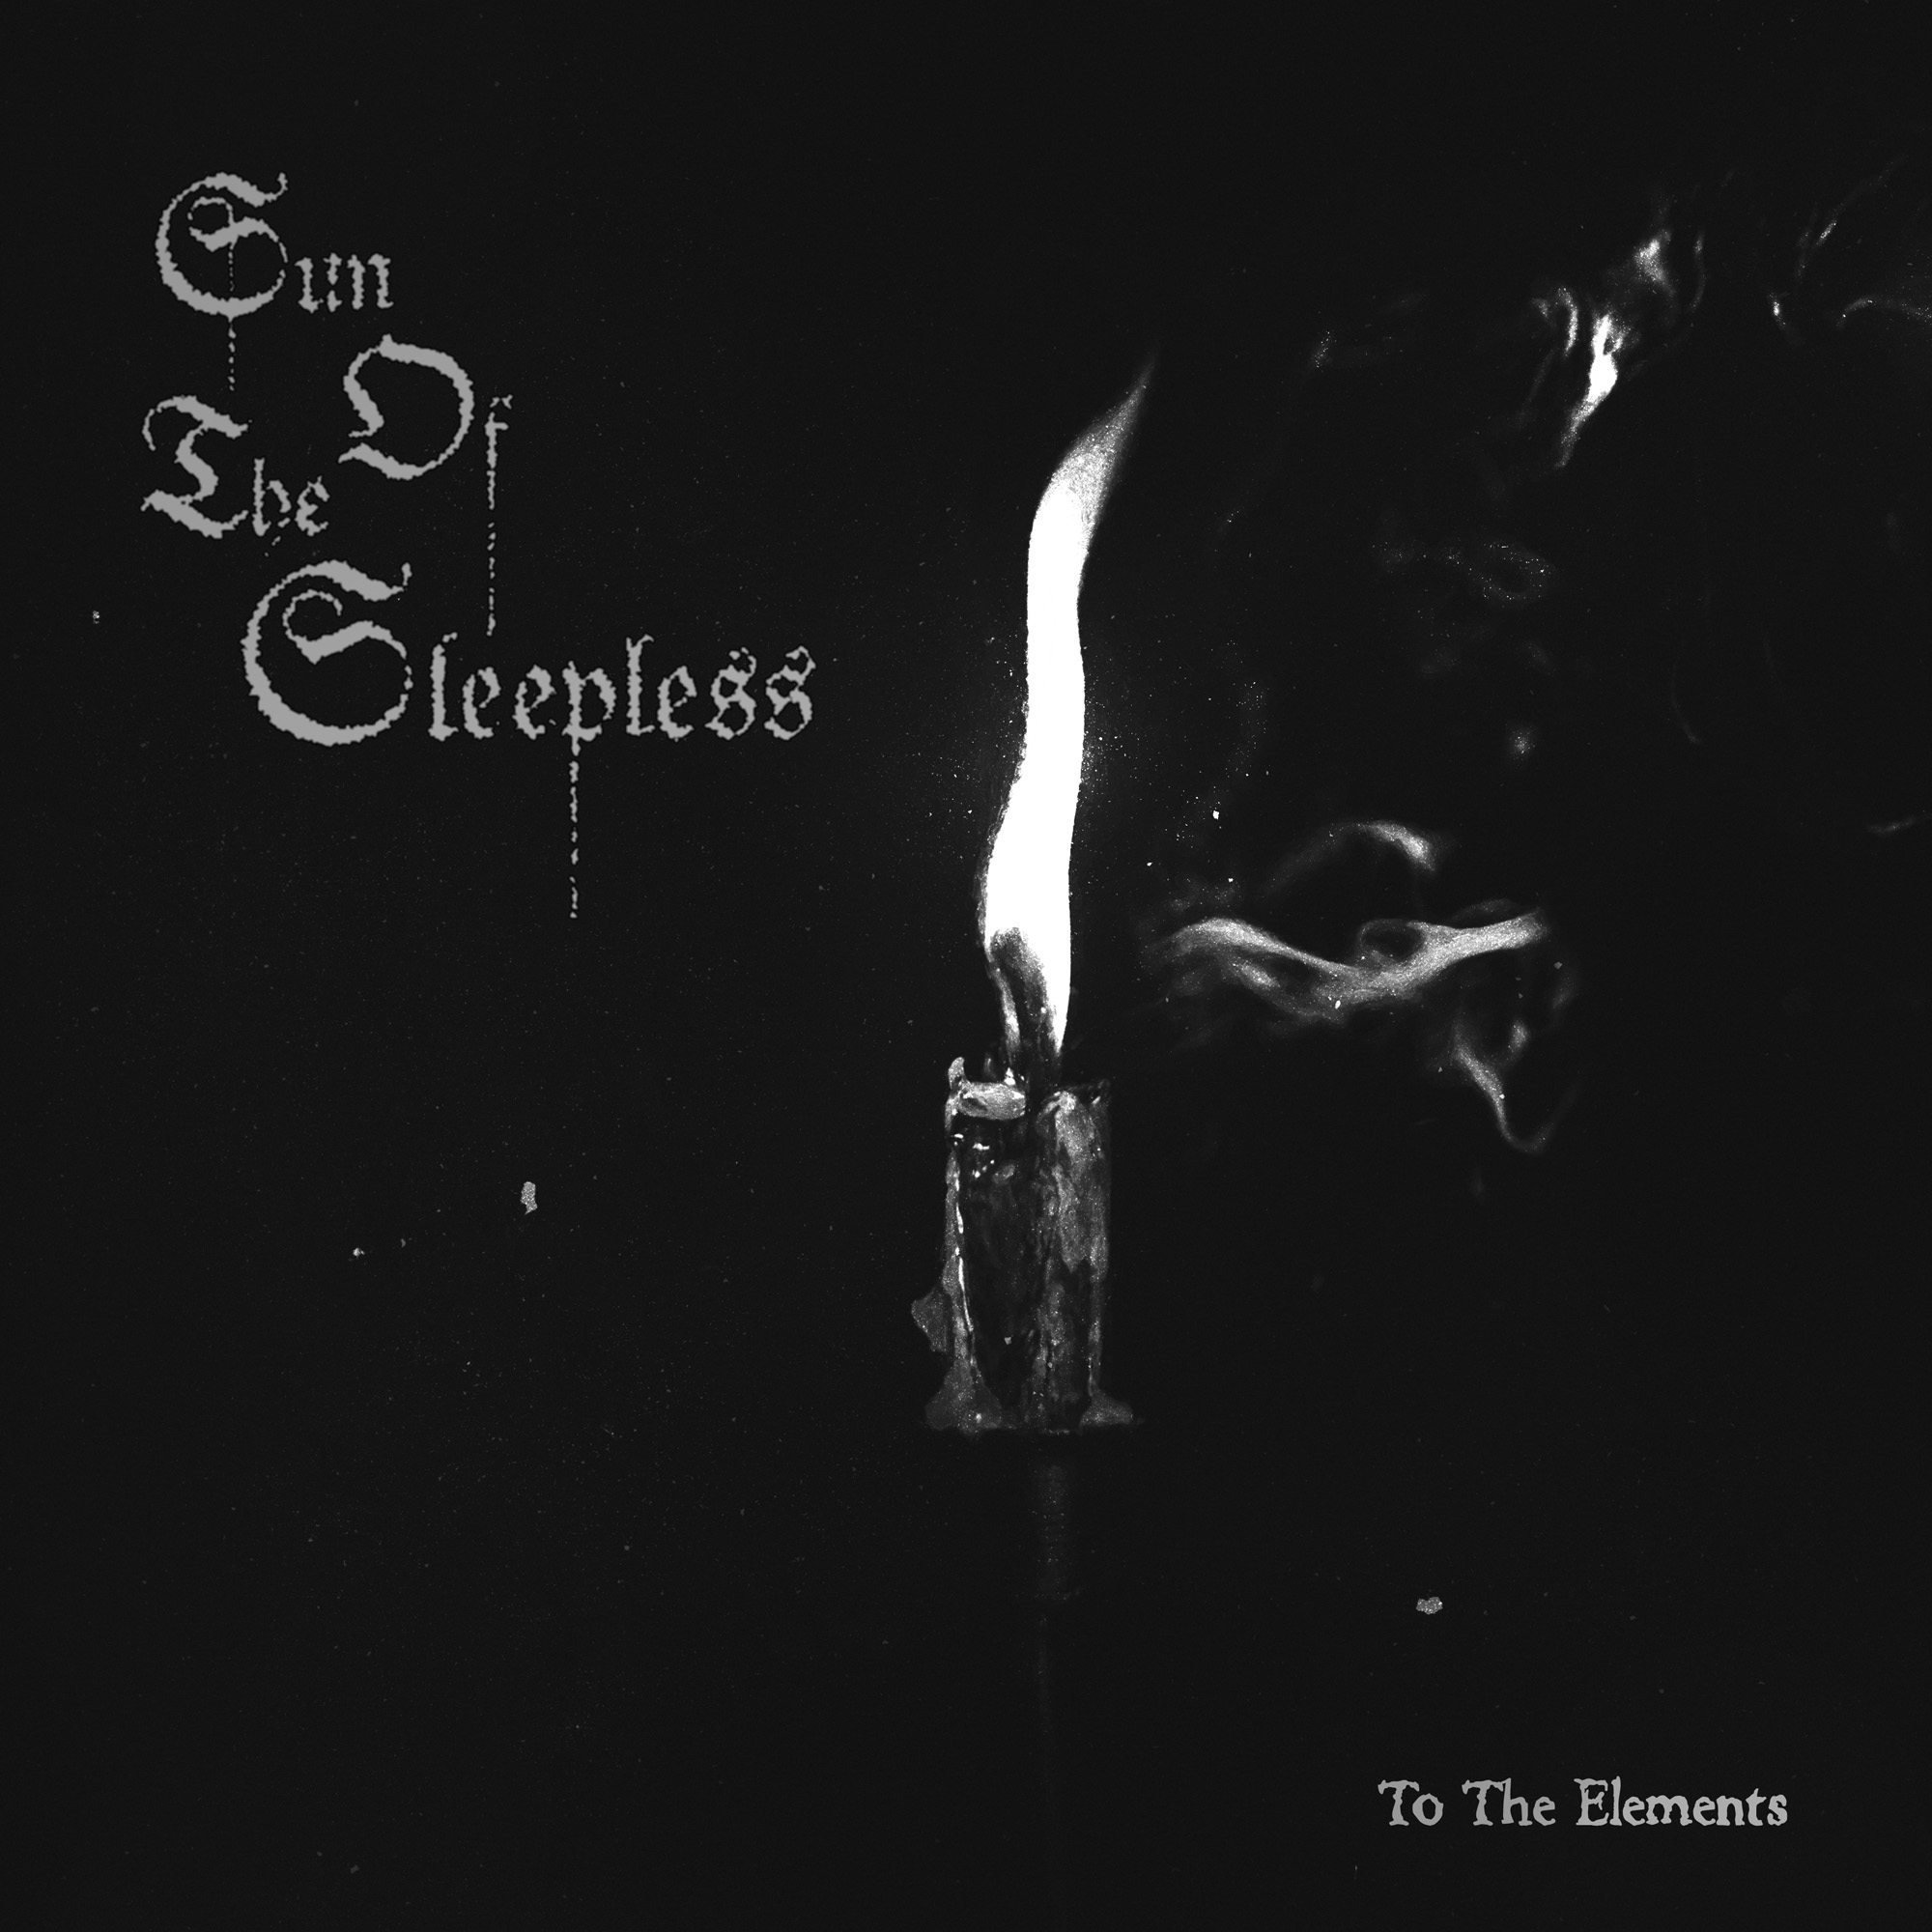 SUN OF THE SLEEPLESS (DE) – To The Elements